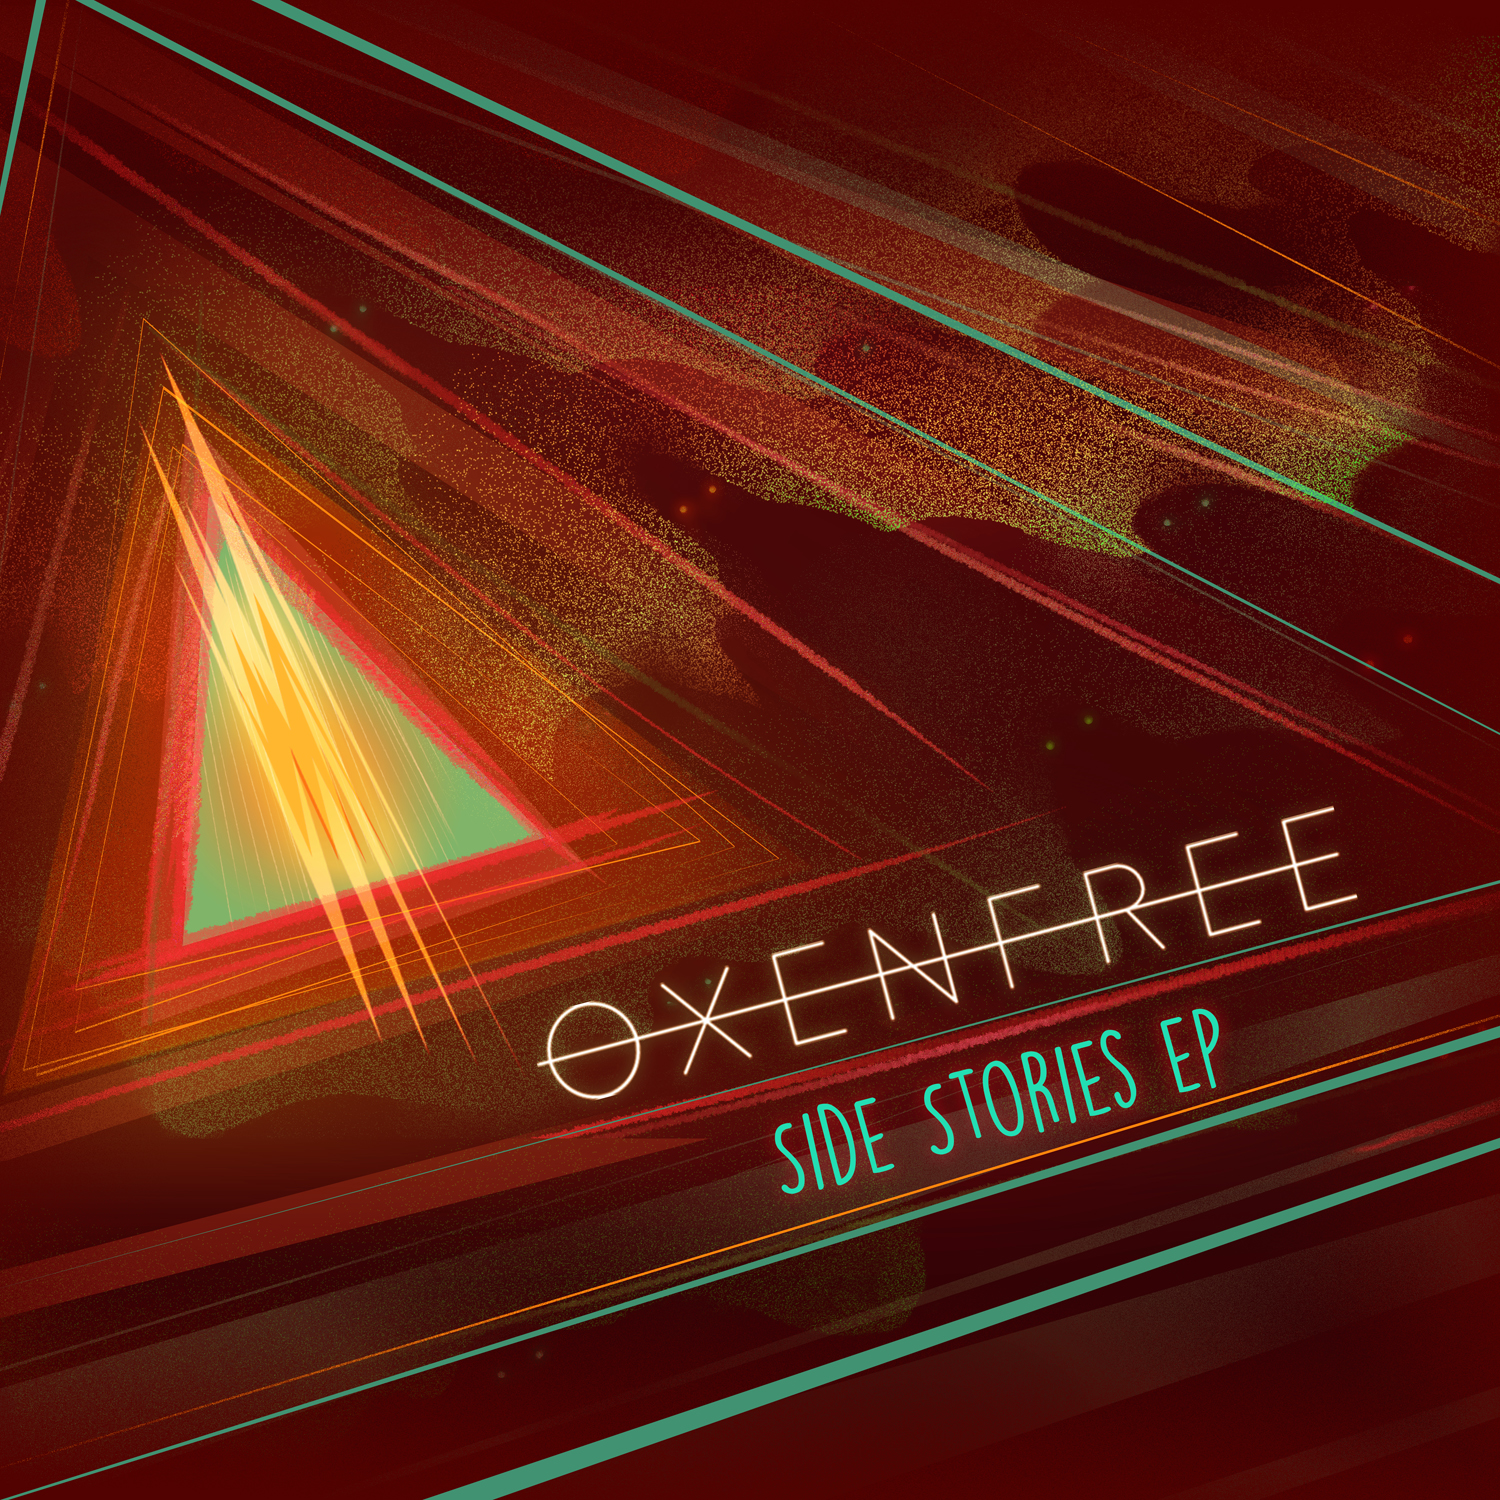 morse code in oxenfree